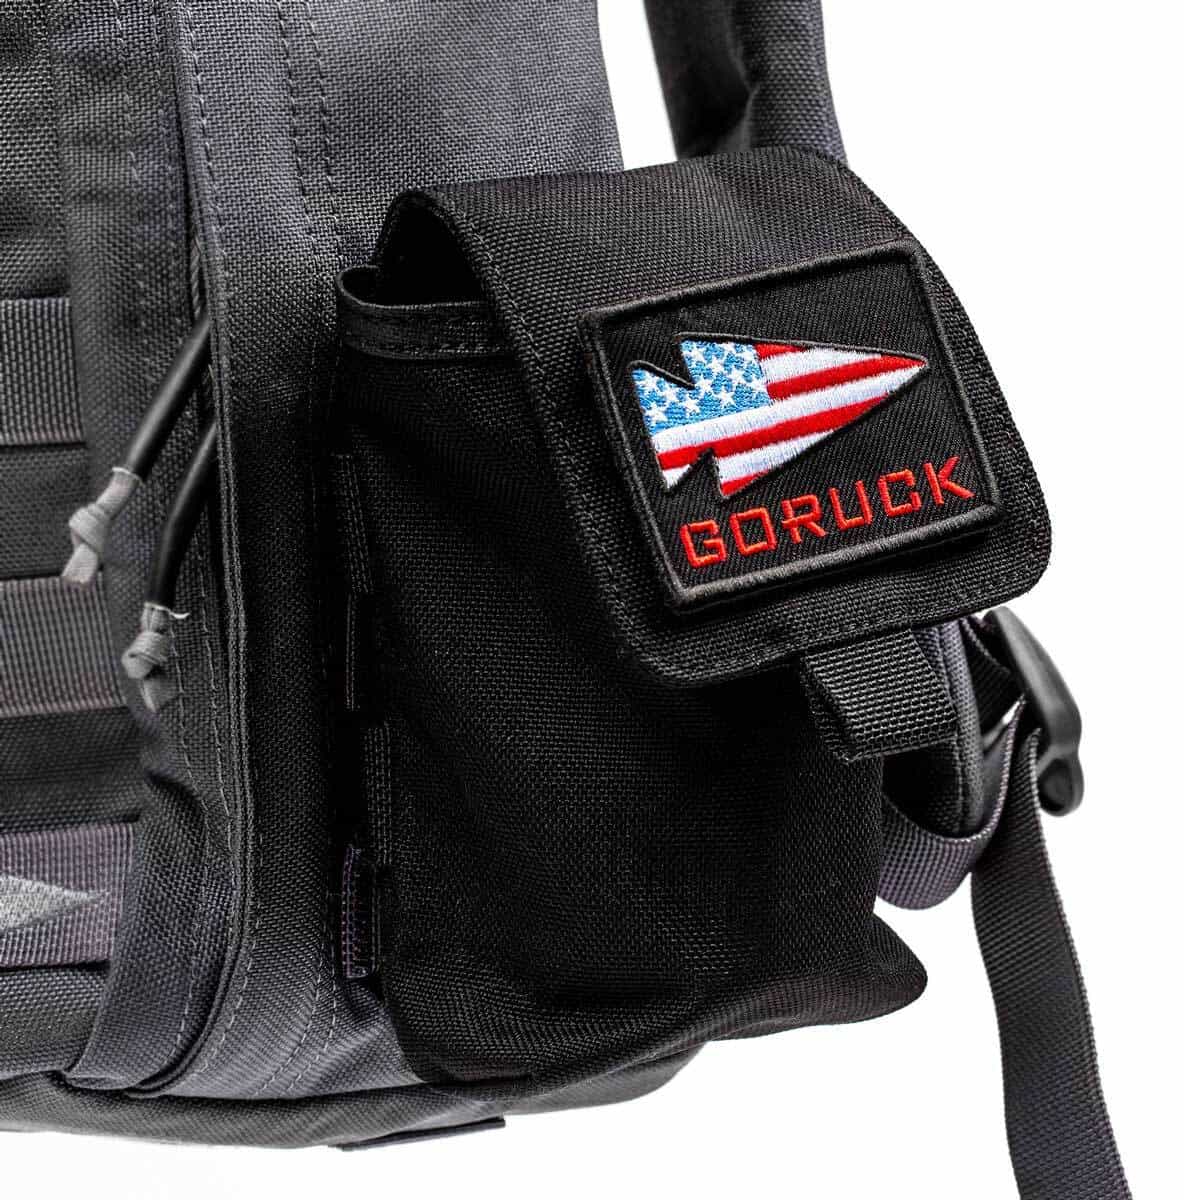 GORUCK Simple Side Pocket on the ruck